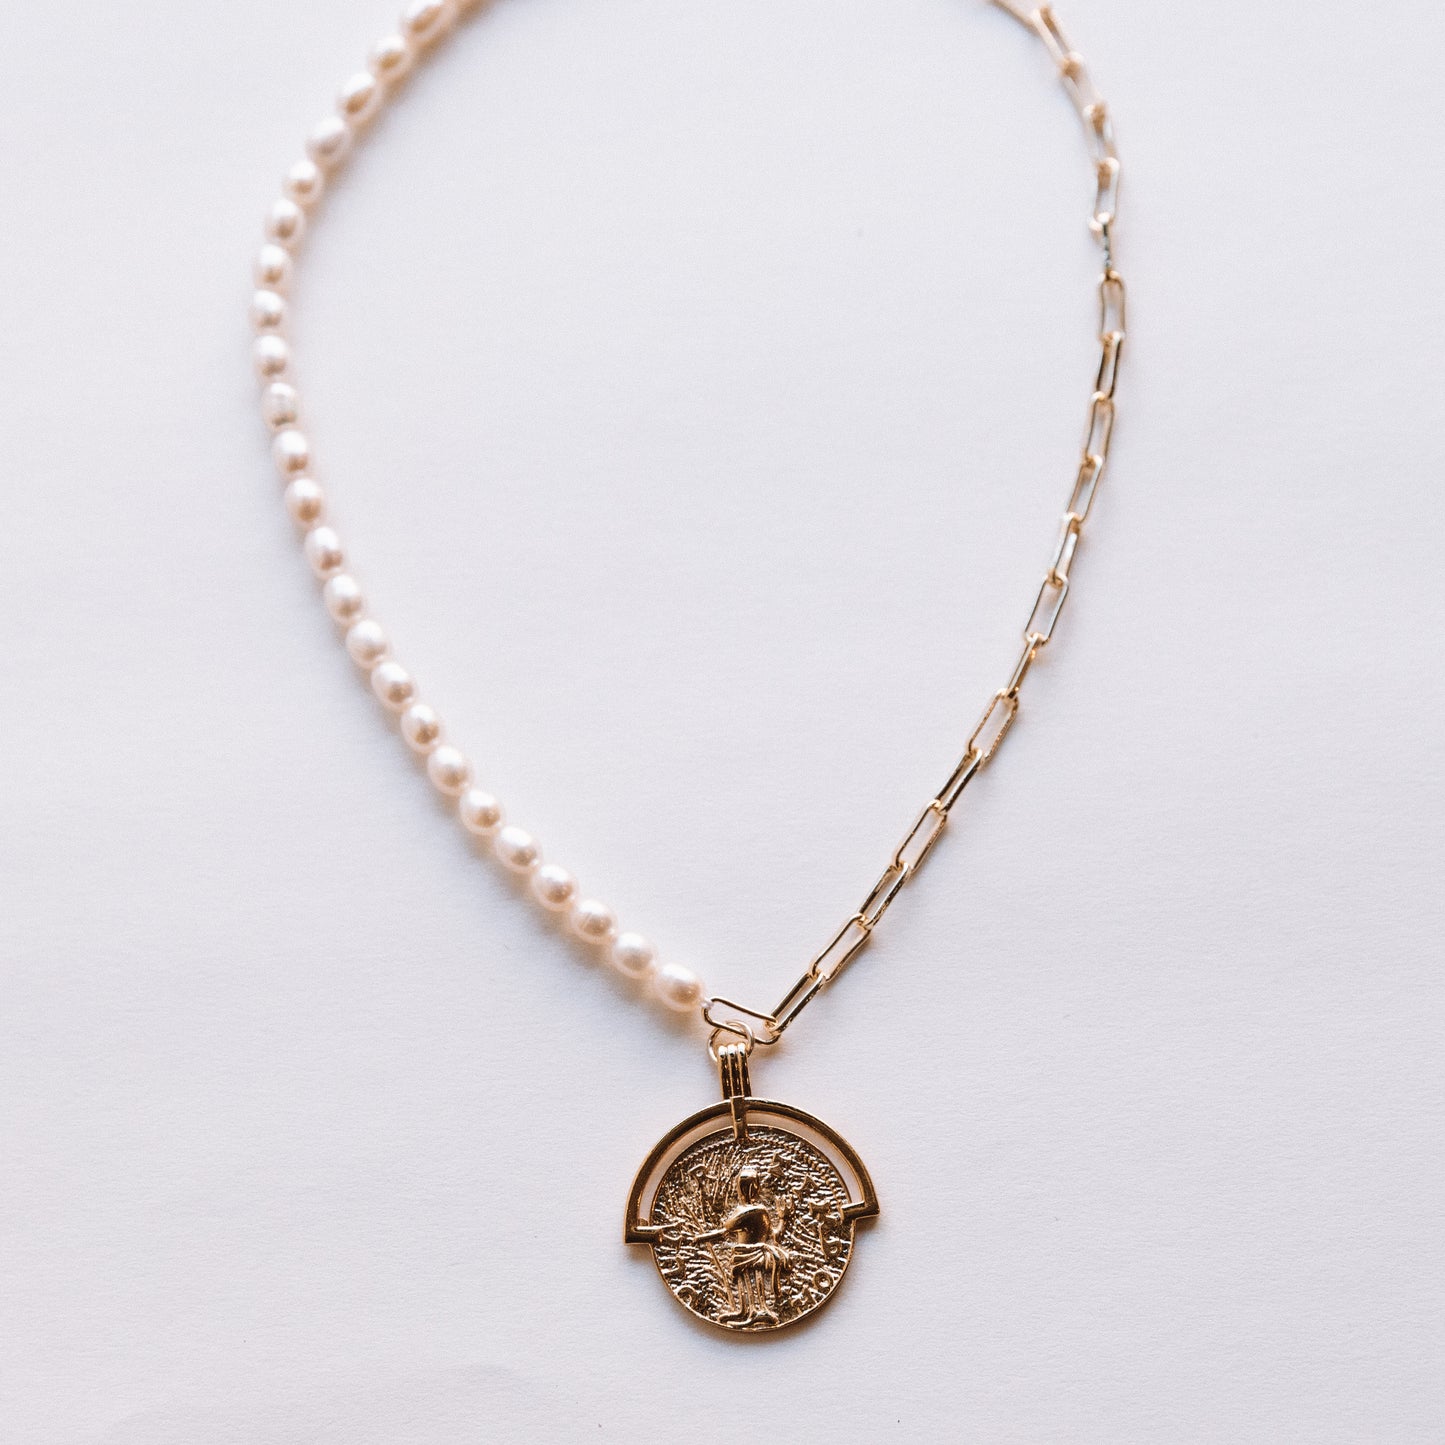 The Pearl Coin Necklace